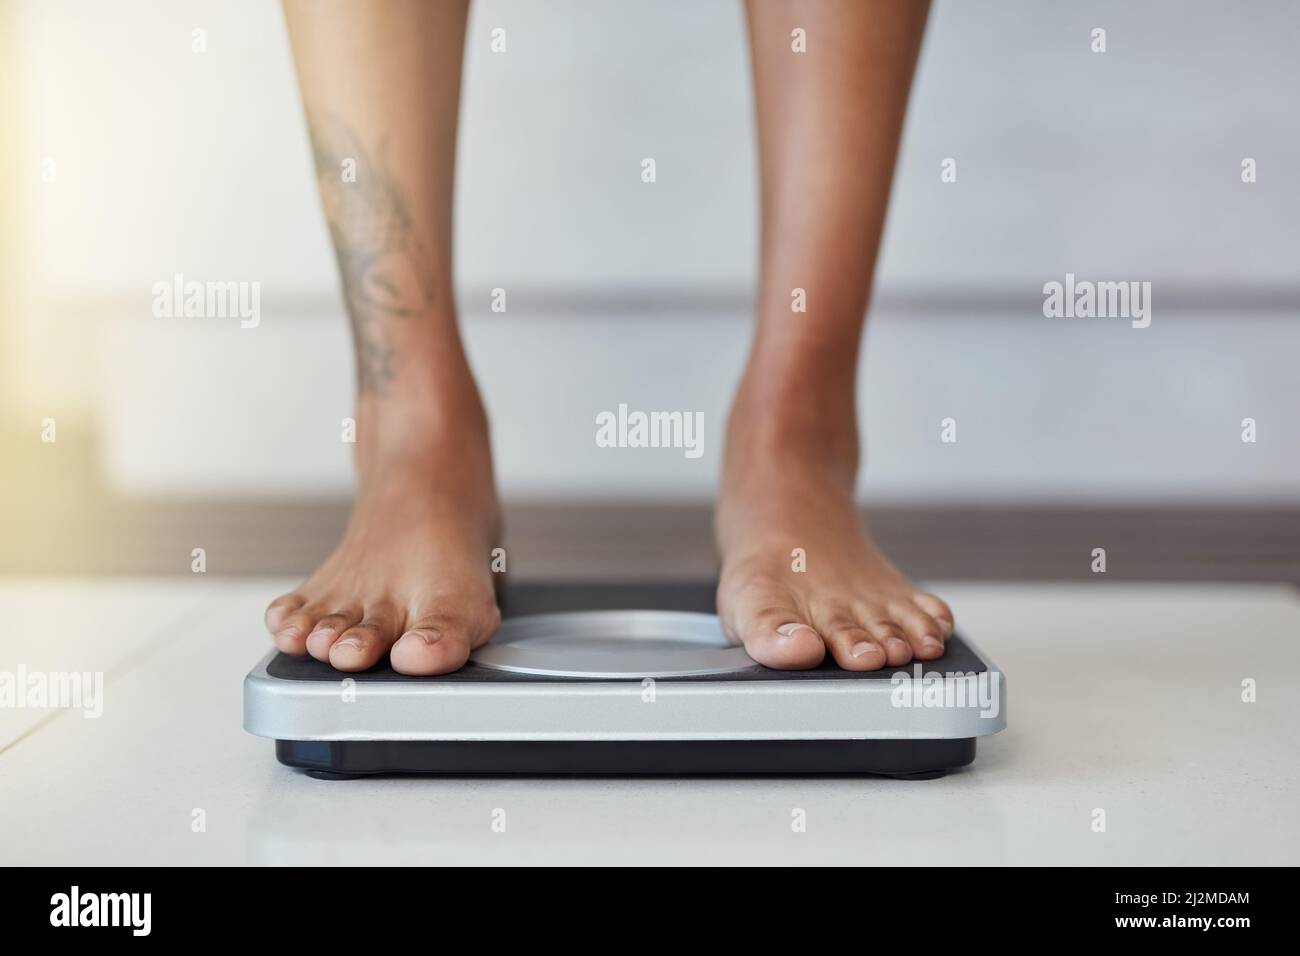 https://c8.alamy.com/comp/2J2MDAM/and-the-results-are-in-closeup-shot-of-a-woman-weighing-herself-on-a-scale-at-home-2J2MDAM.jpg